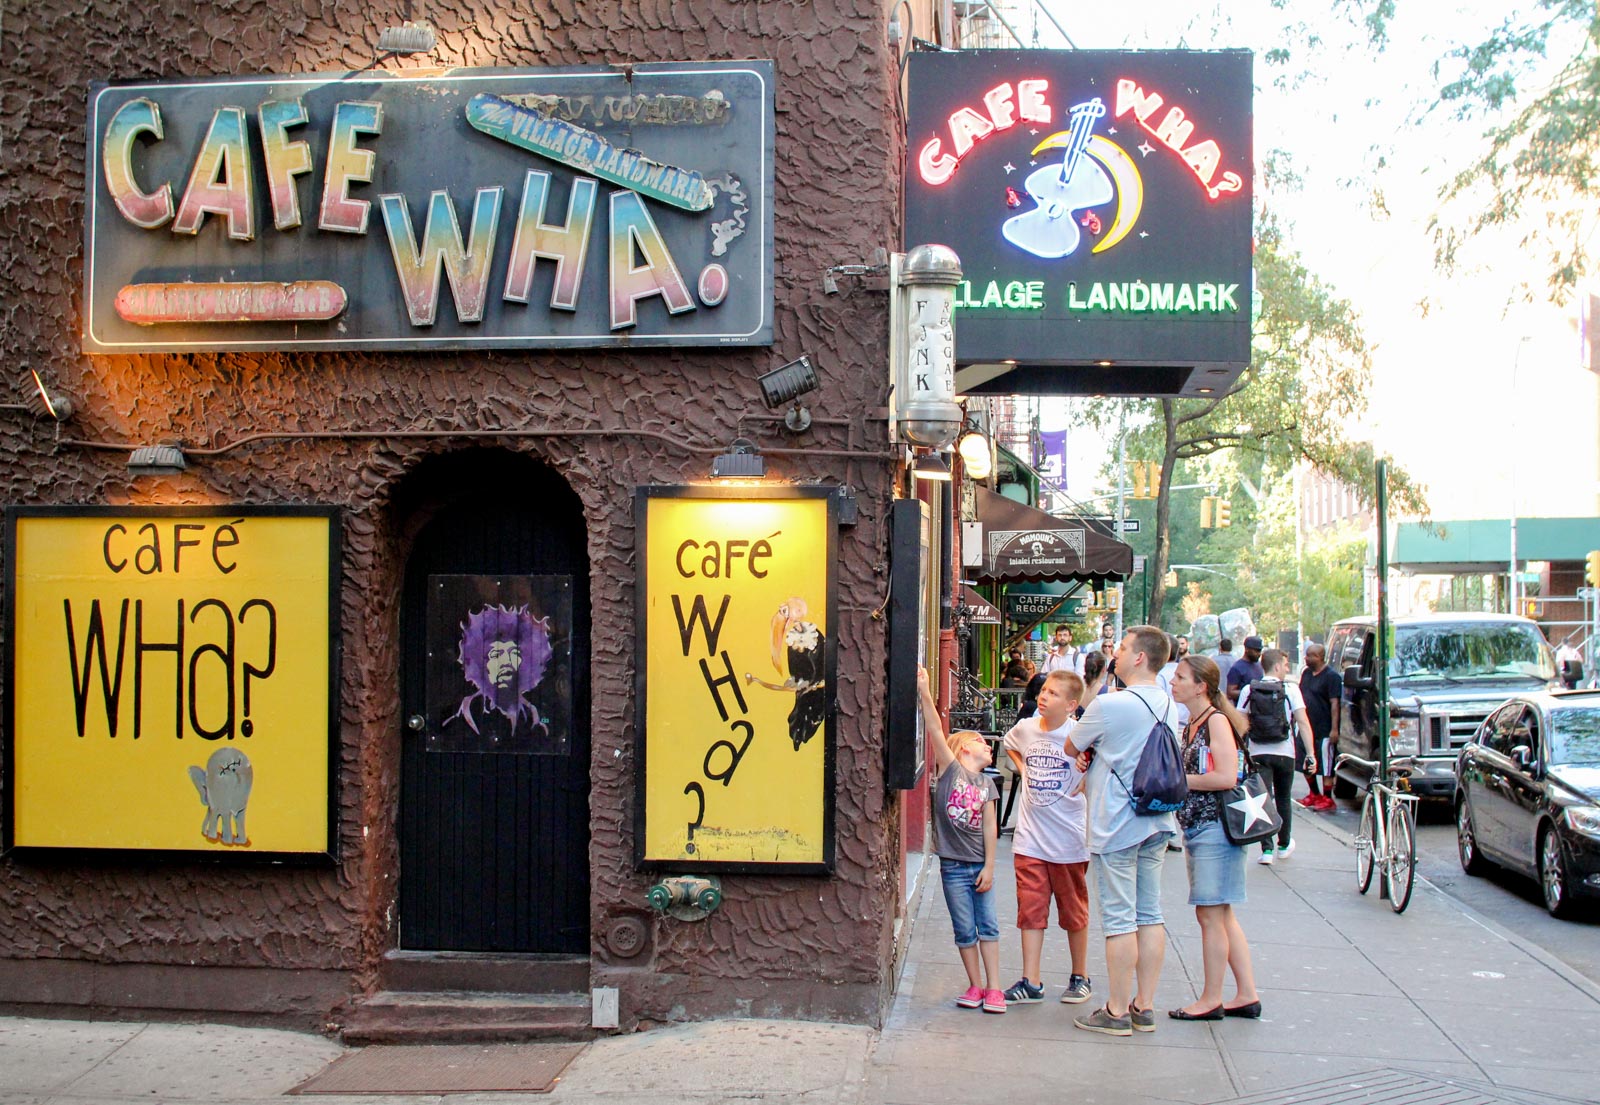 The legendary Cafe Wha? in the Village